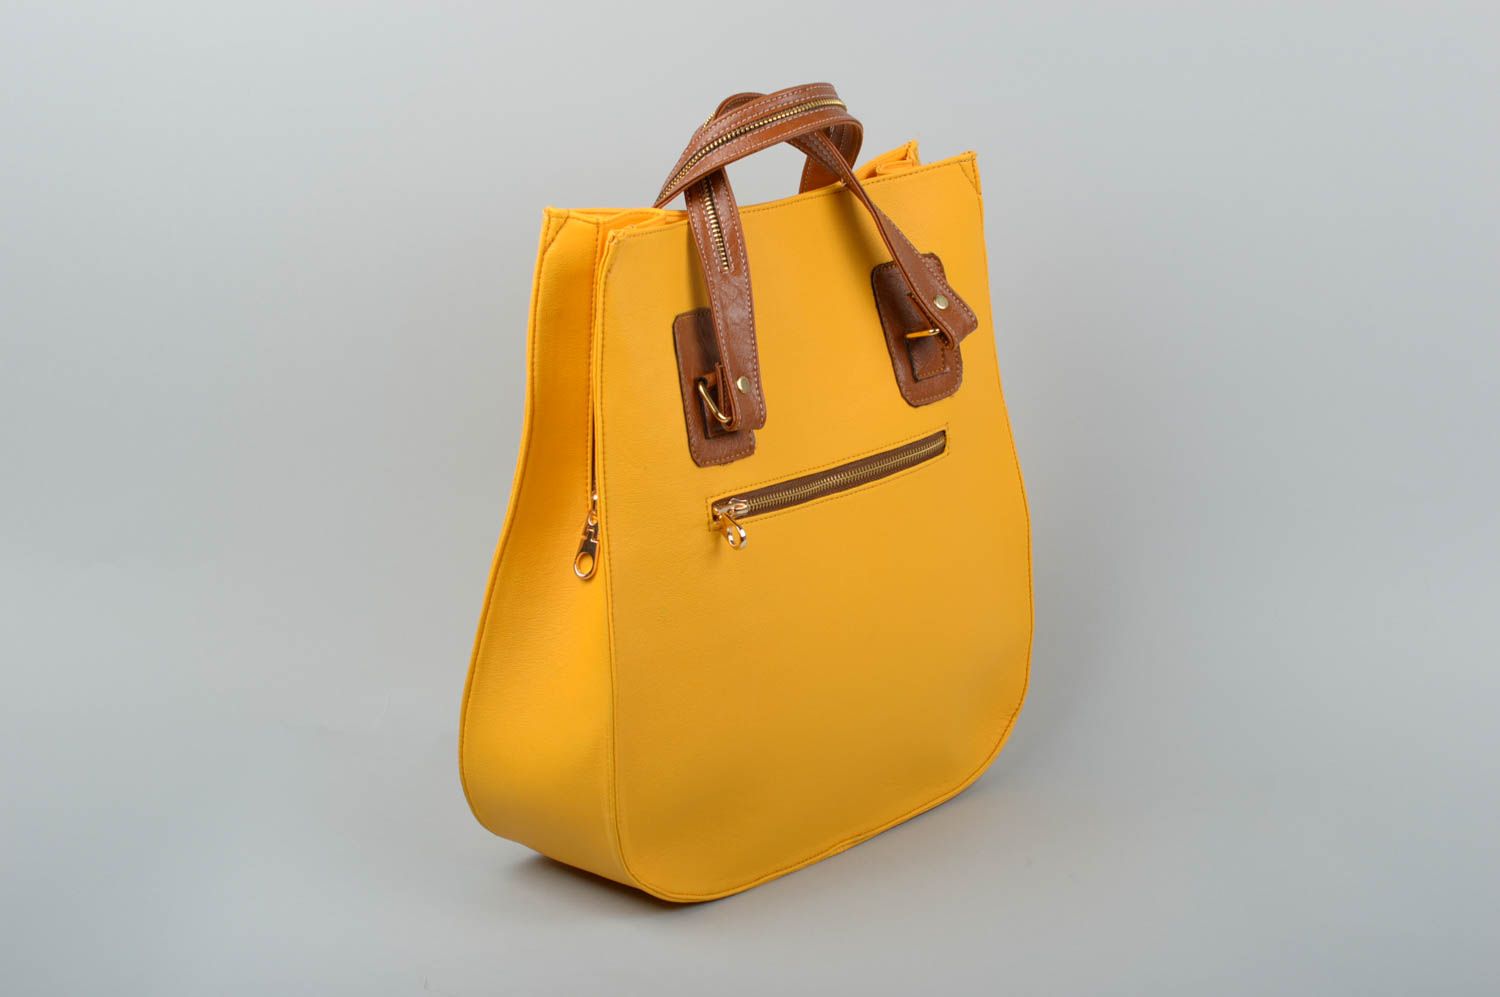 Shoulder bag handmade leather large ladys bag casual style yellow nice gift photo 2